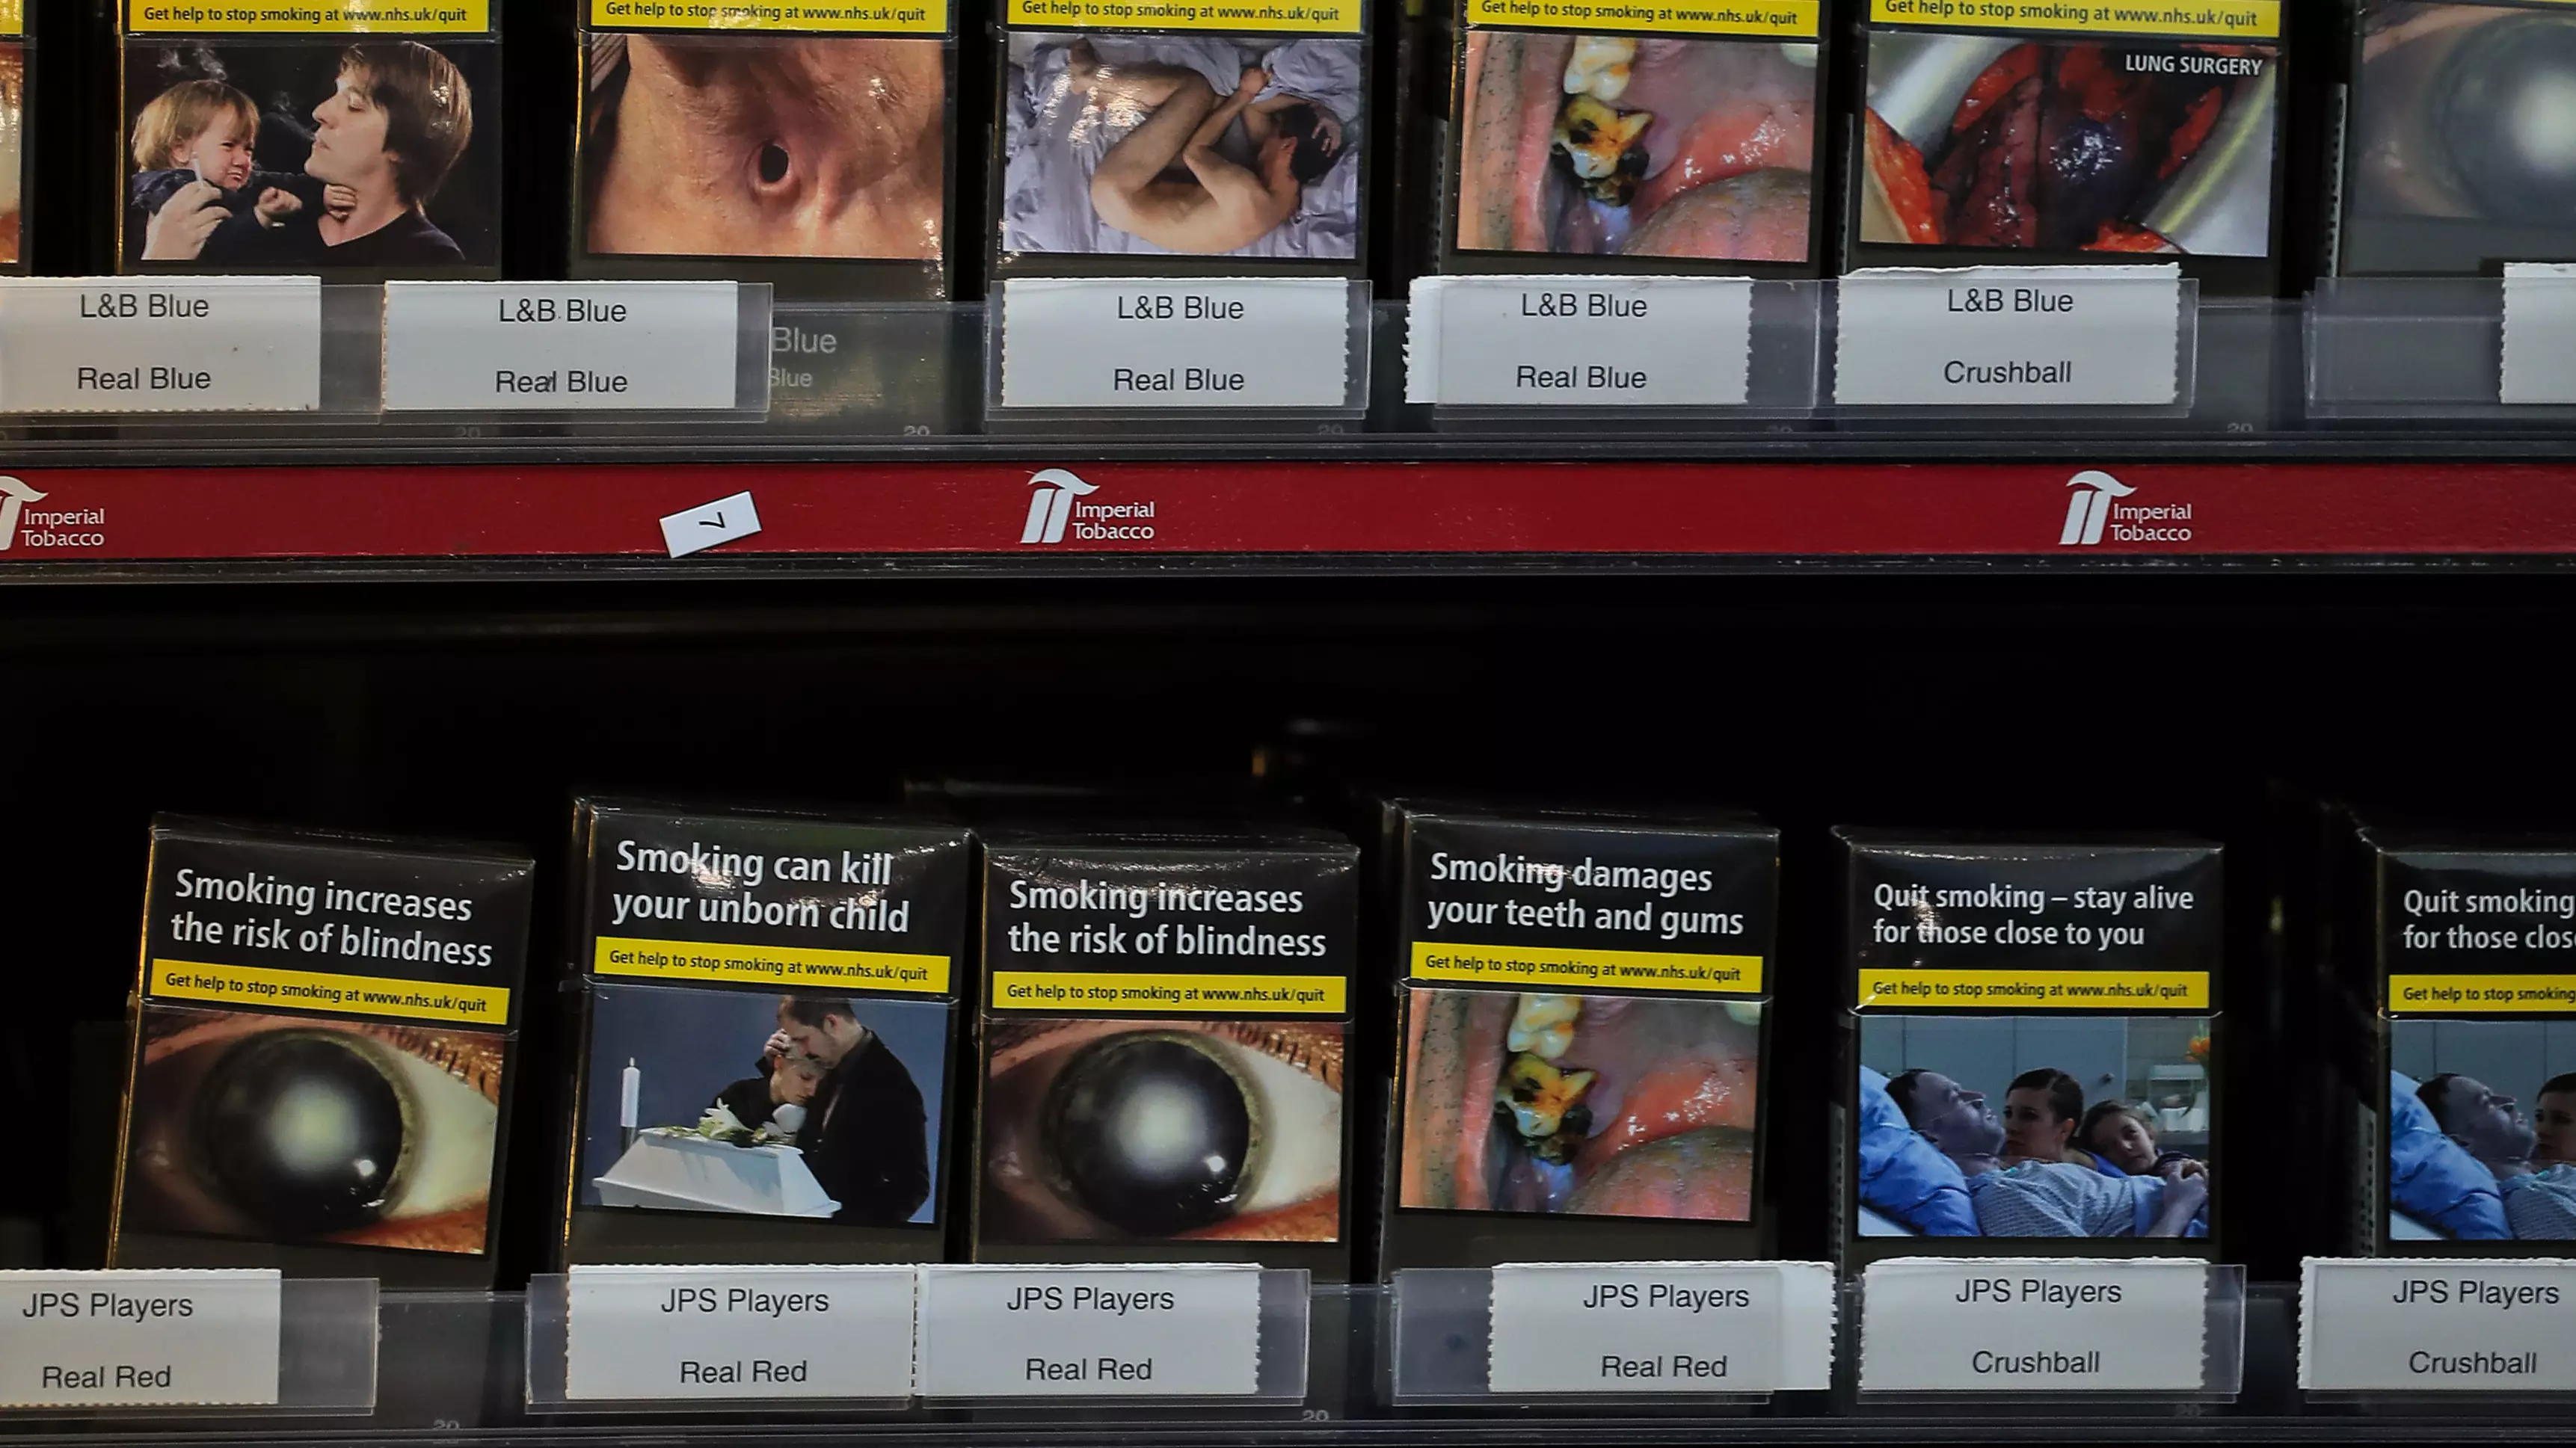 Man Claims Photo Of His Amputated Leg Is Used On Cigarette Packs Without His Permission 